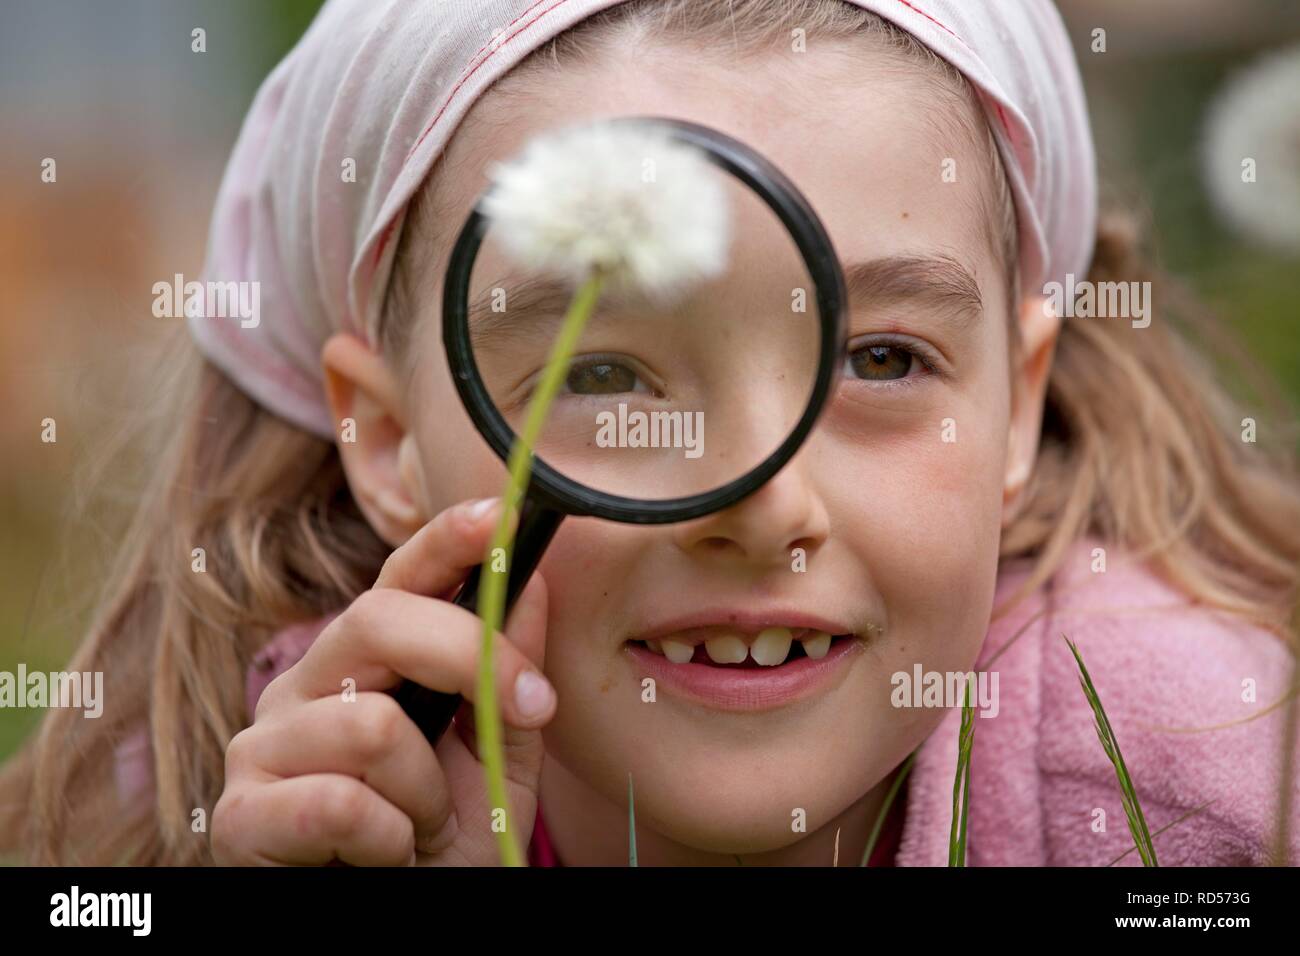 Little girl looking at a blowball through a magnifying glass Stock Photo